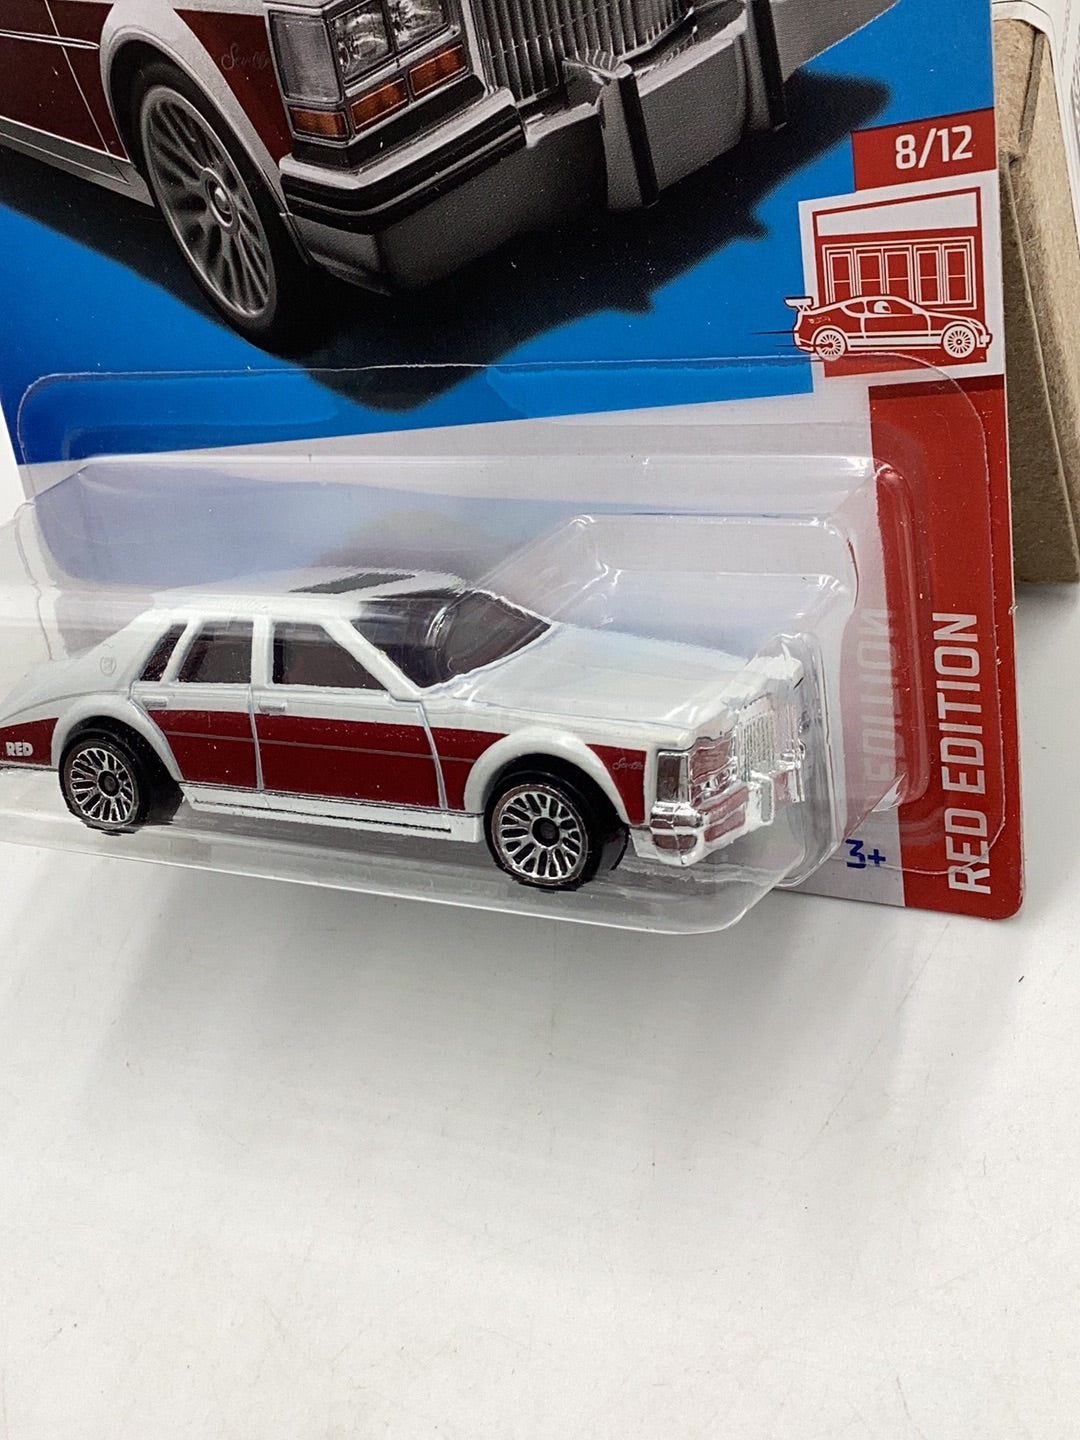 hot wheels red edition #75 82 Cadillac Seville 150G